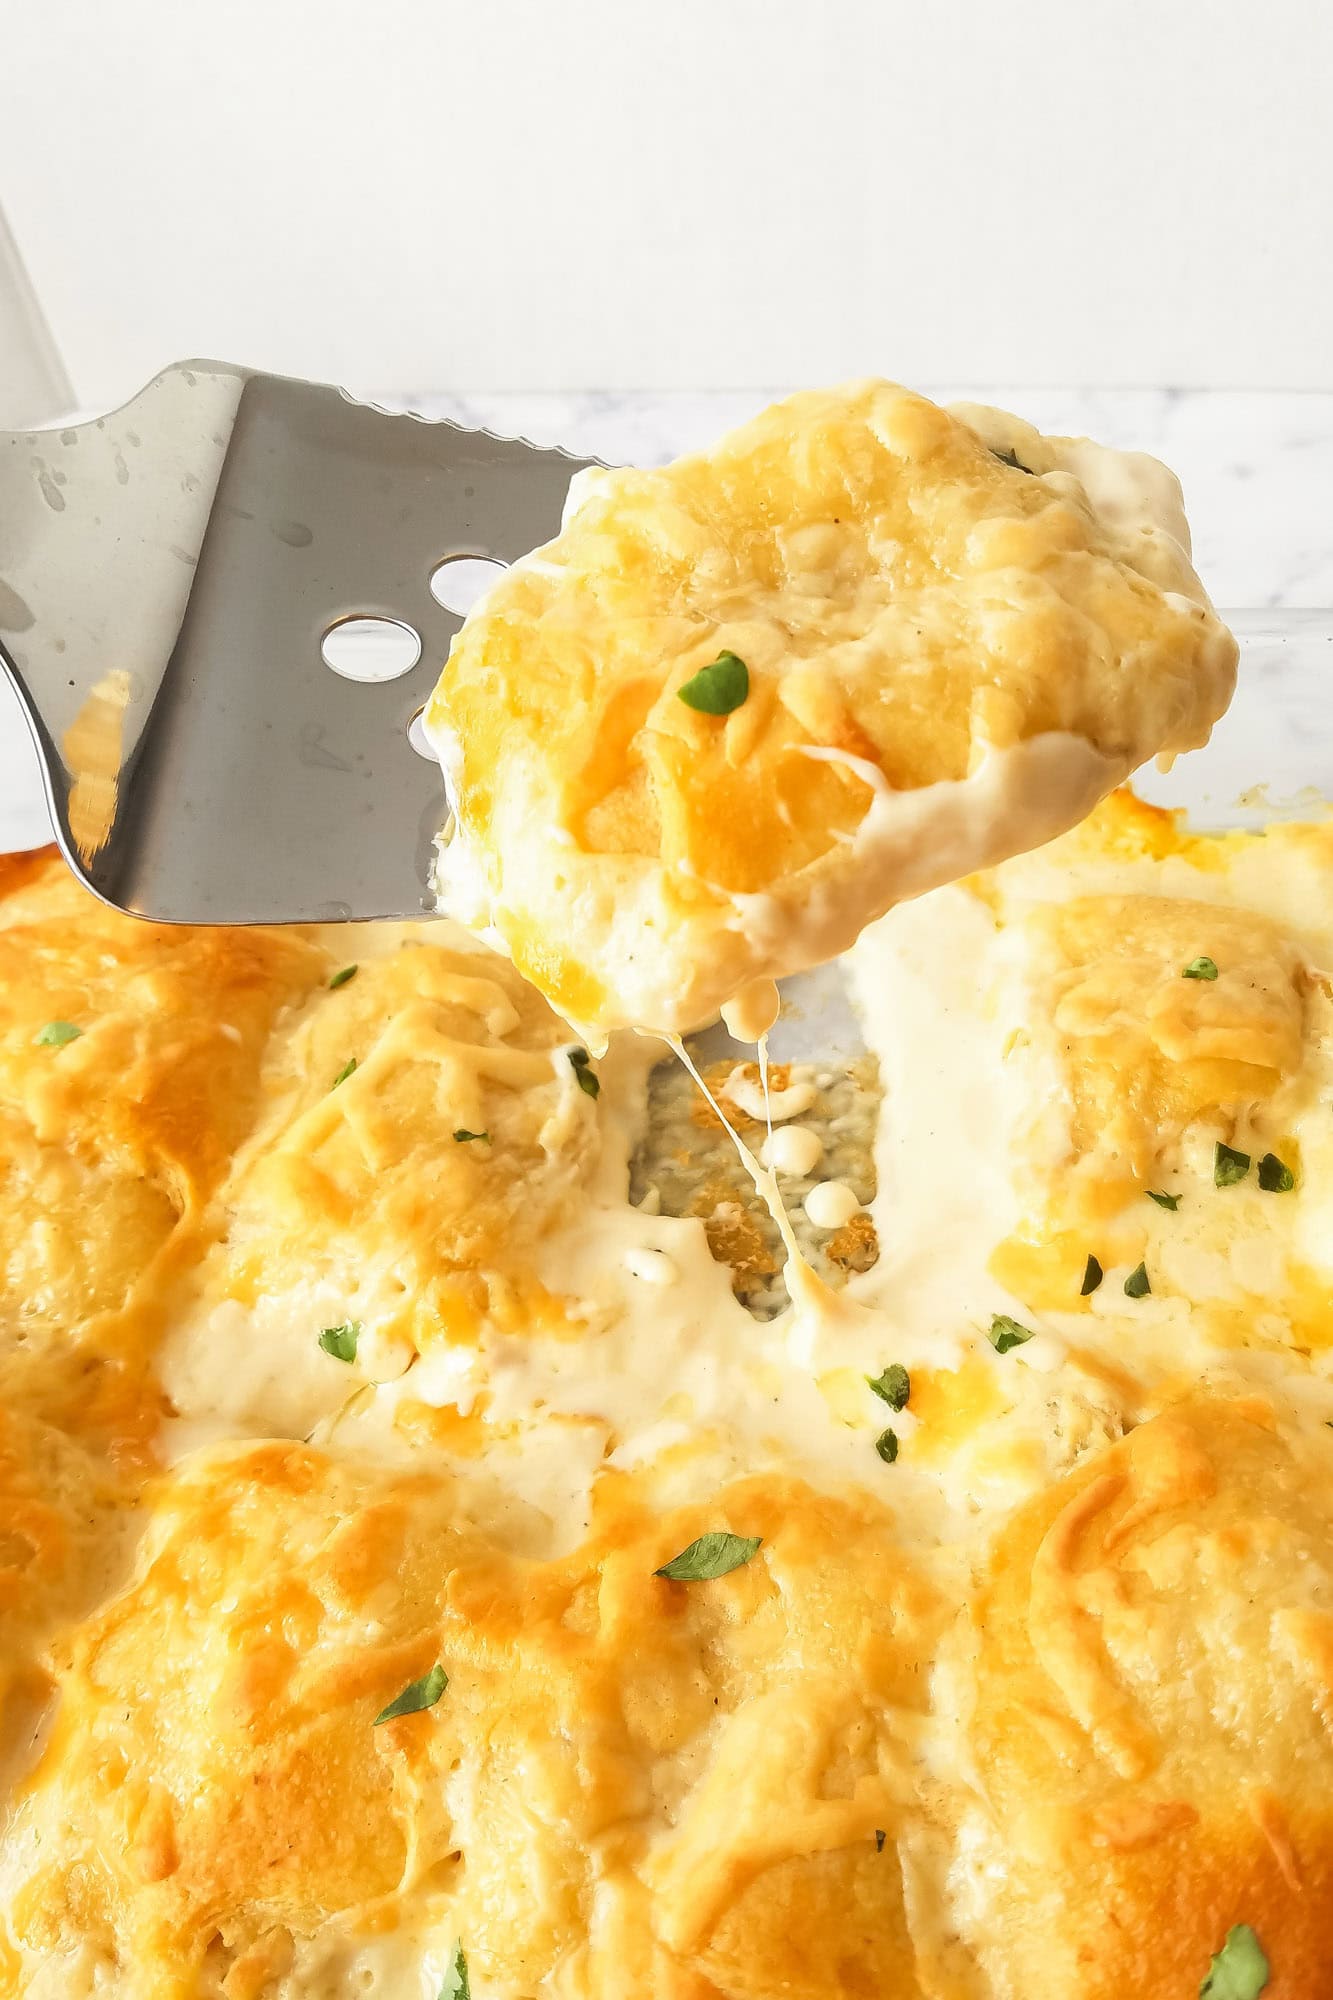 A spatula lifting a steamy slice of freshly baked chicken alfredo casserole, showing a creamy filling with chicken, wrapped with golden crescent rolls—perfect for easy dinner ideas.